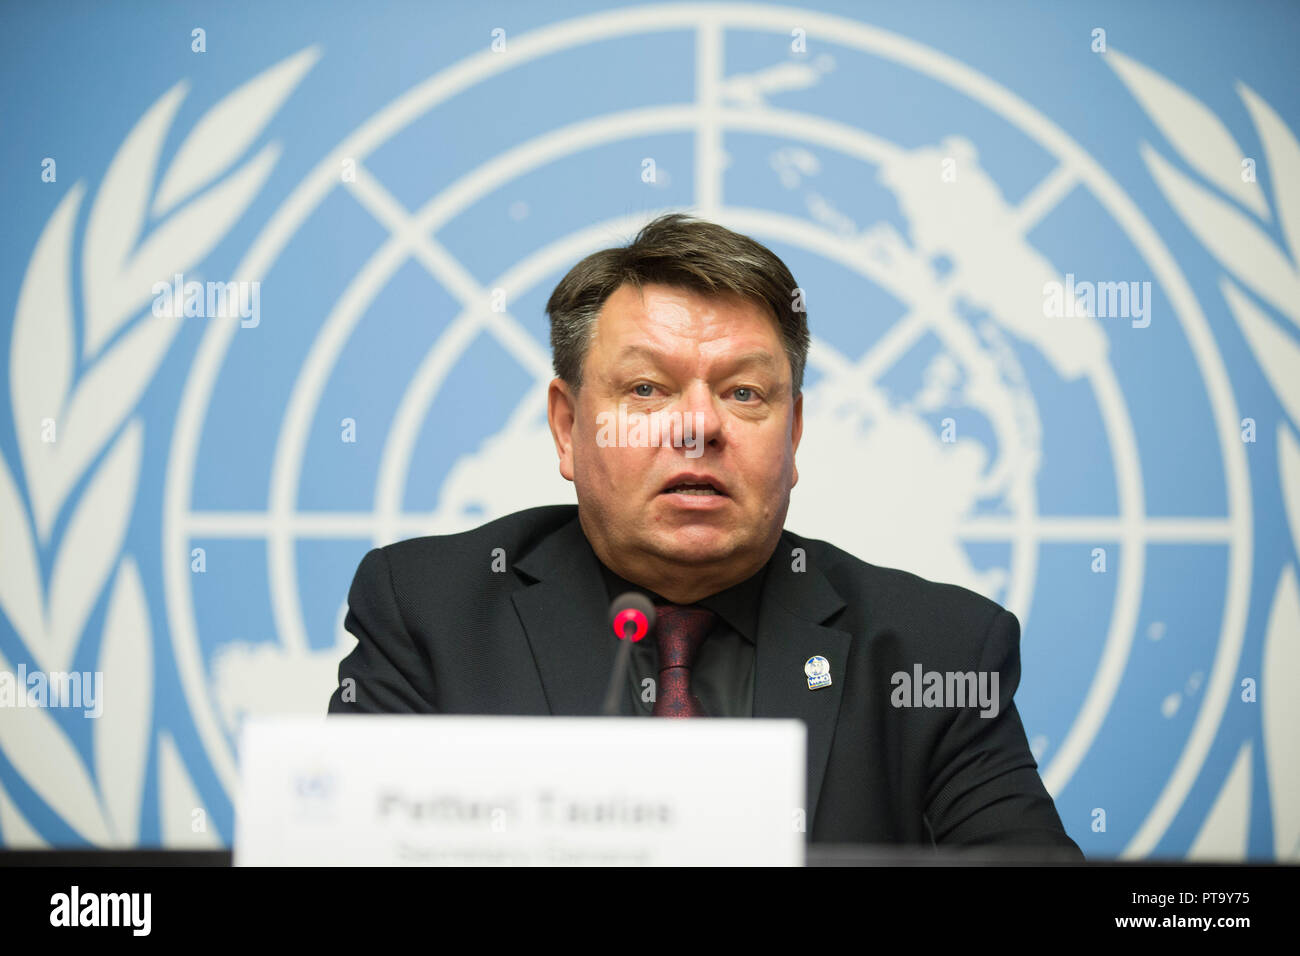 Geneva, Switzerland. 8th Oct, 2018. World Meteorological Organization (WMO) Secretary-General Petteri Taalas attends a news conference after the release of the Intergovernmental Panel on Climate Change (IPCC) Special Report, at the European headquarters of the United Nations in Geneva, Switzerland, Oct. 8, 2018. Credit: Xu Jinquan/Xinhua/Alamy Live News Stock Photo